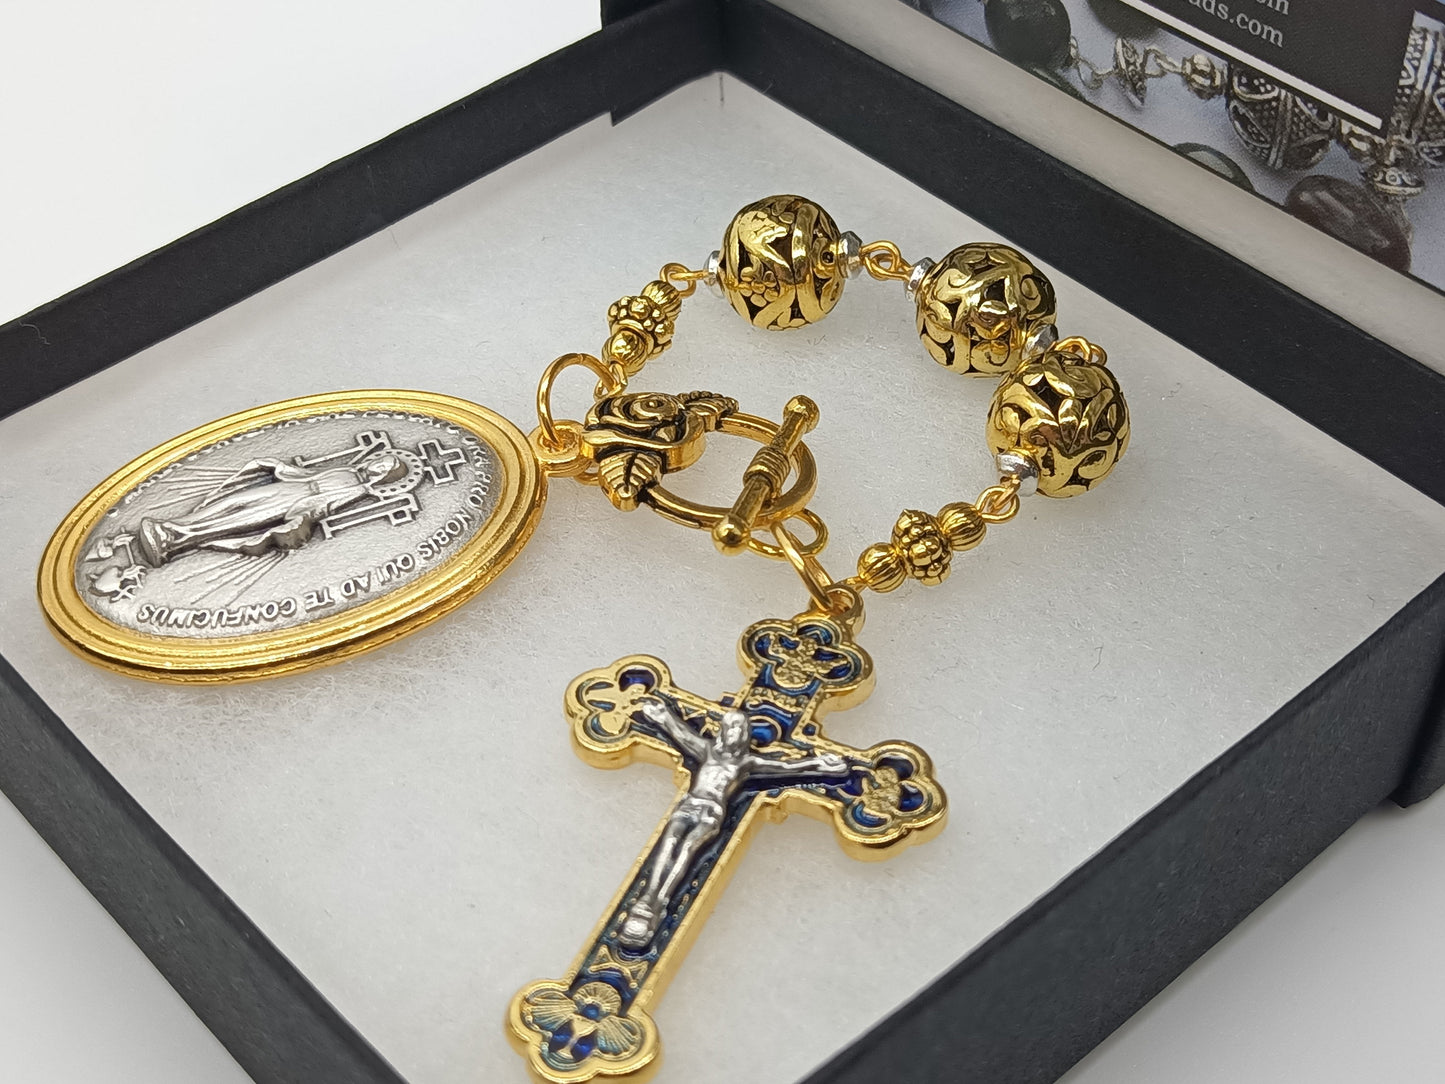 Large Gold Miraculous medal 3 Hail Mary devotional prayer beads, Three Hail Mary prayer beads, Car visor rosary, Miraculous medal.